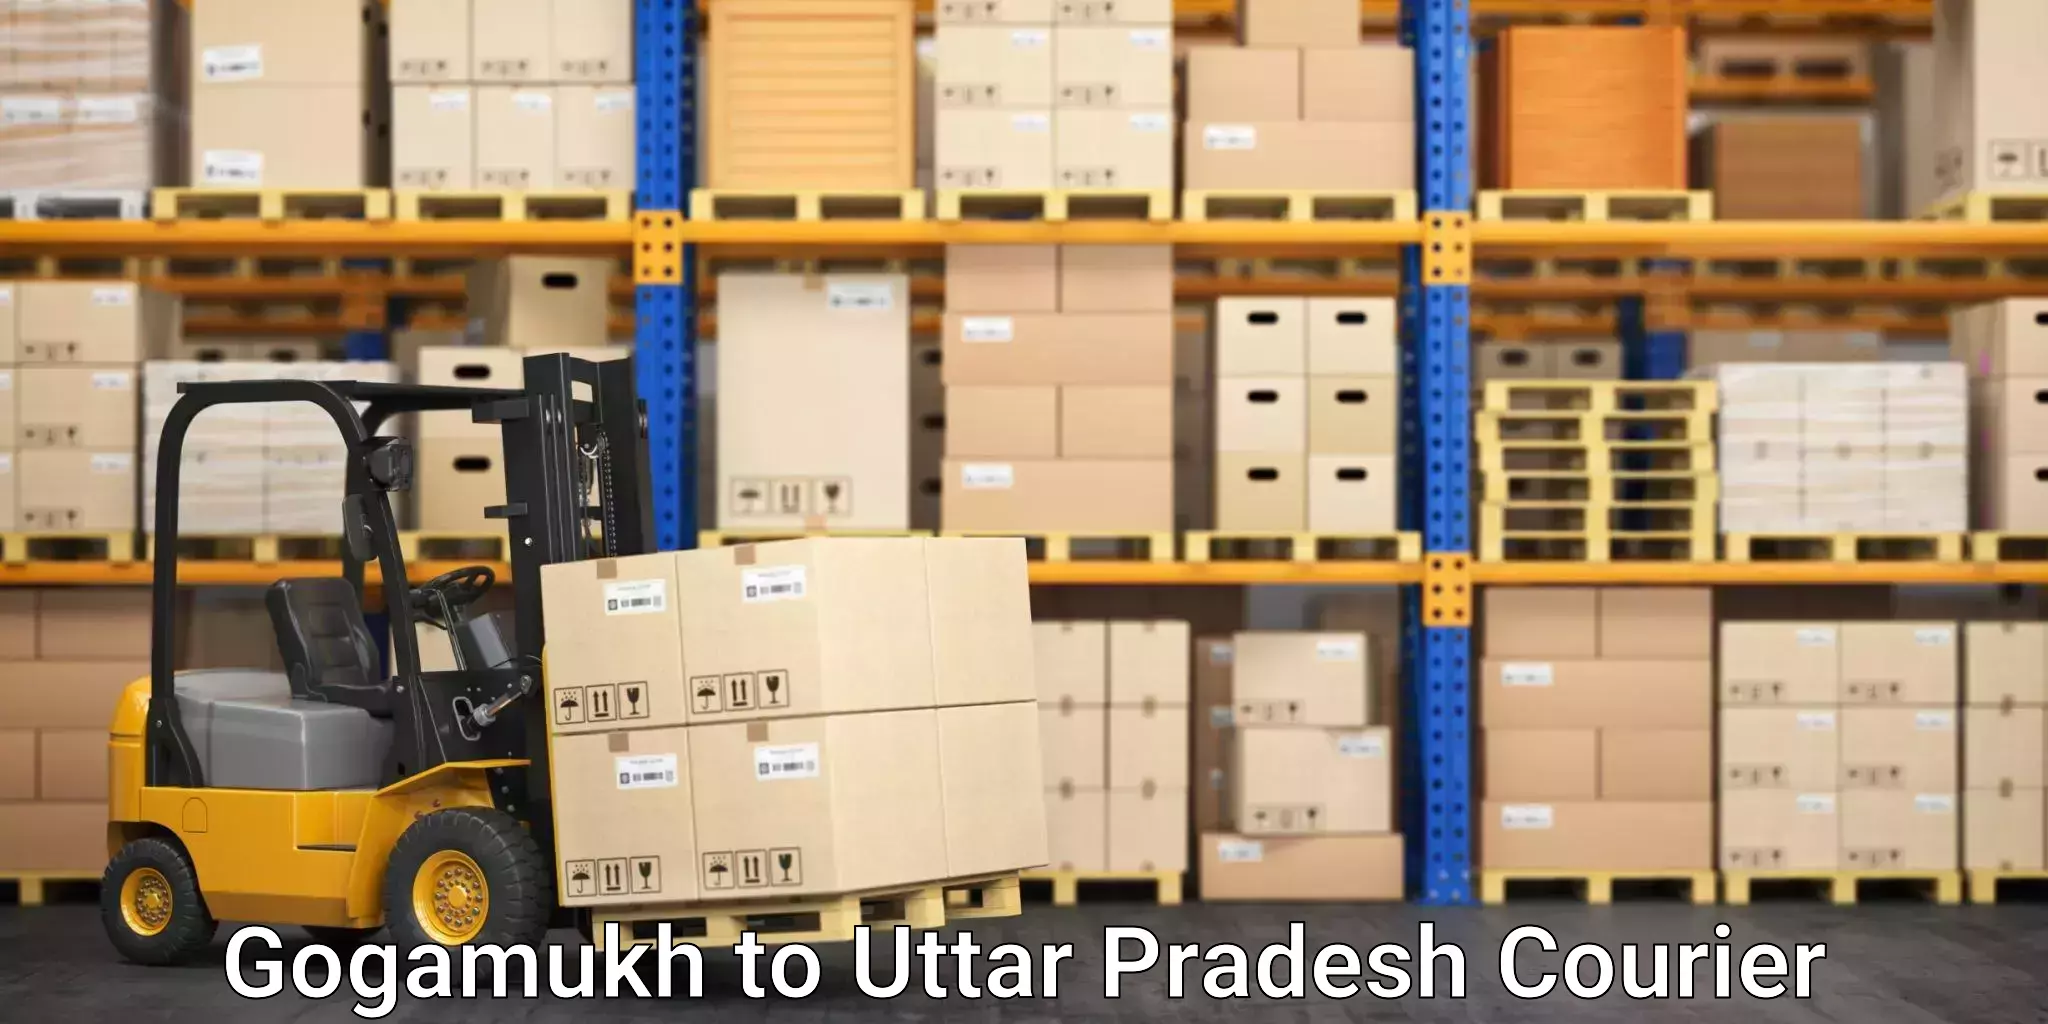 High value parcel delivery Gogamukh to Dhaurahara